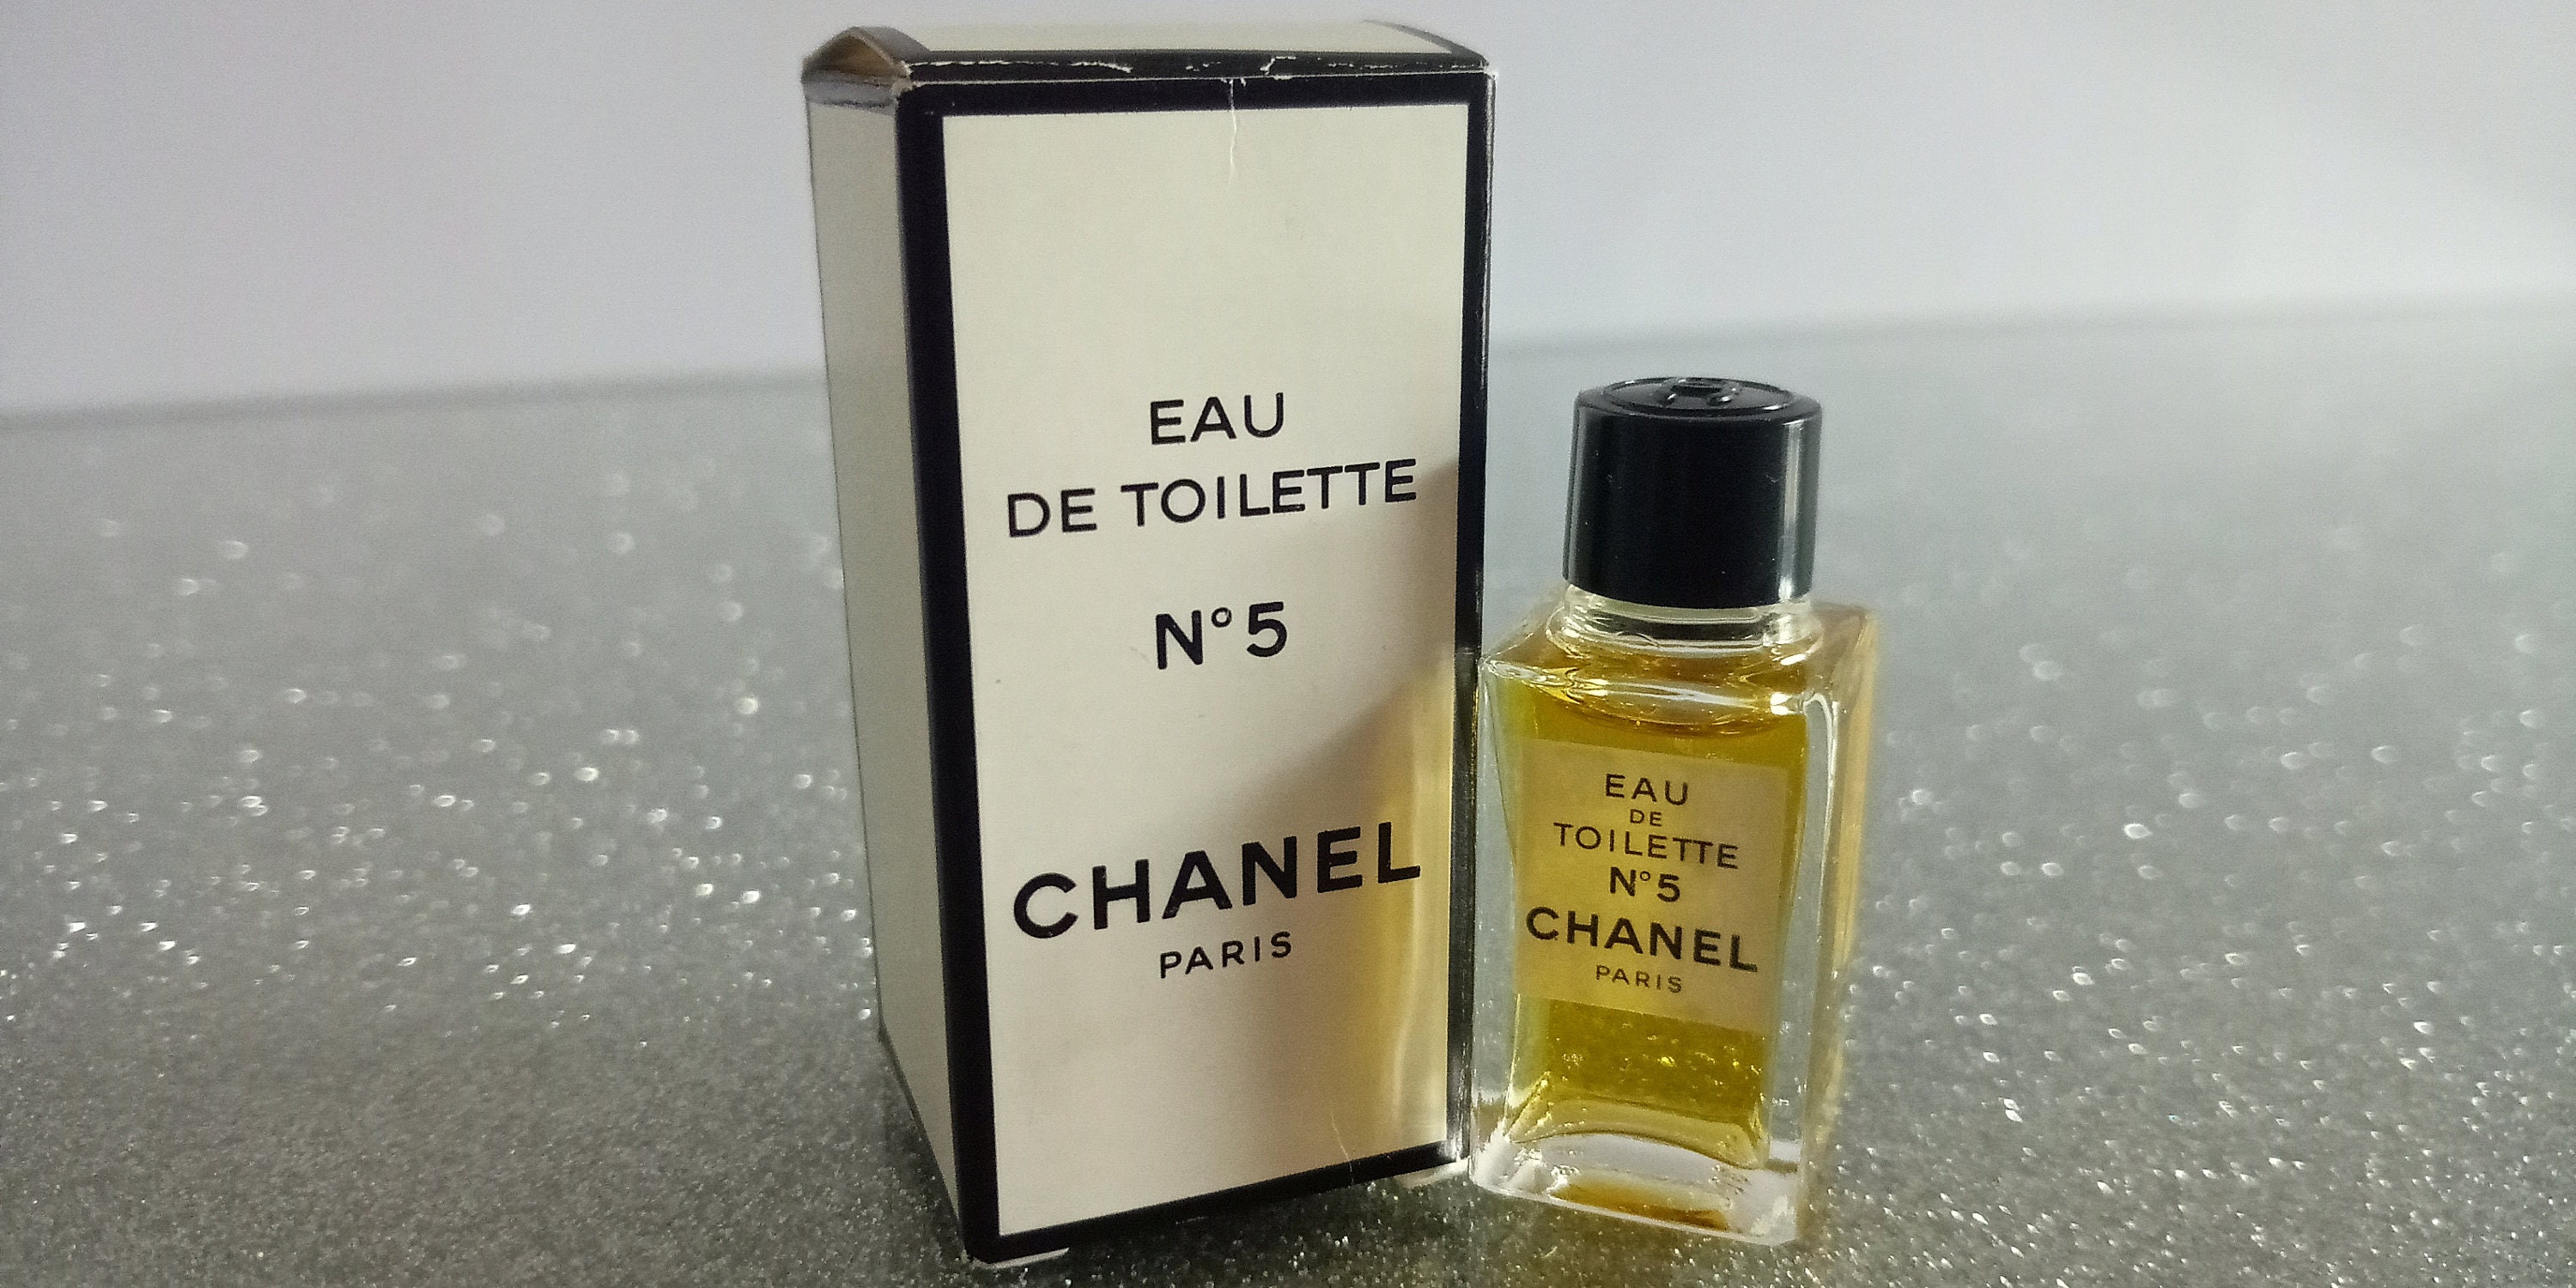 chanel n 22 price